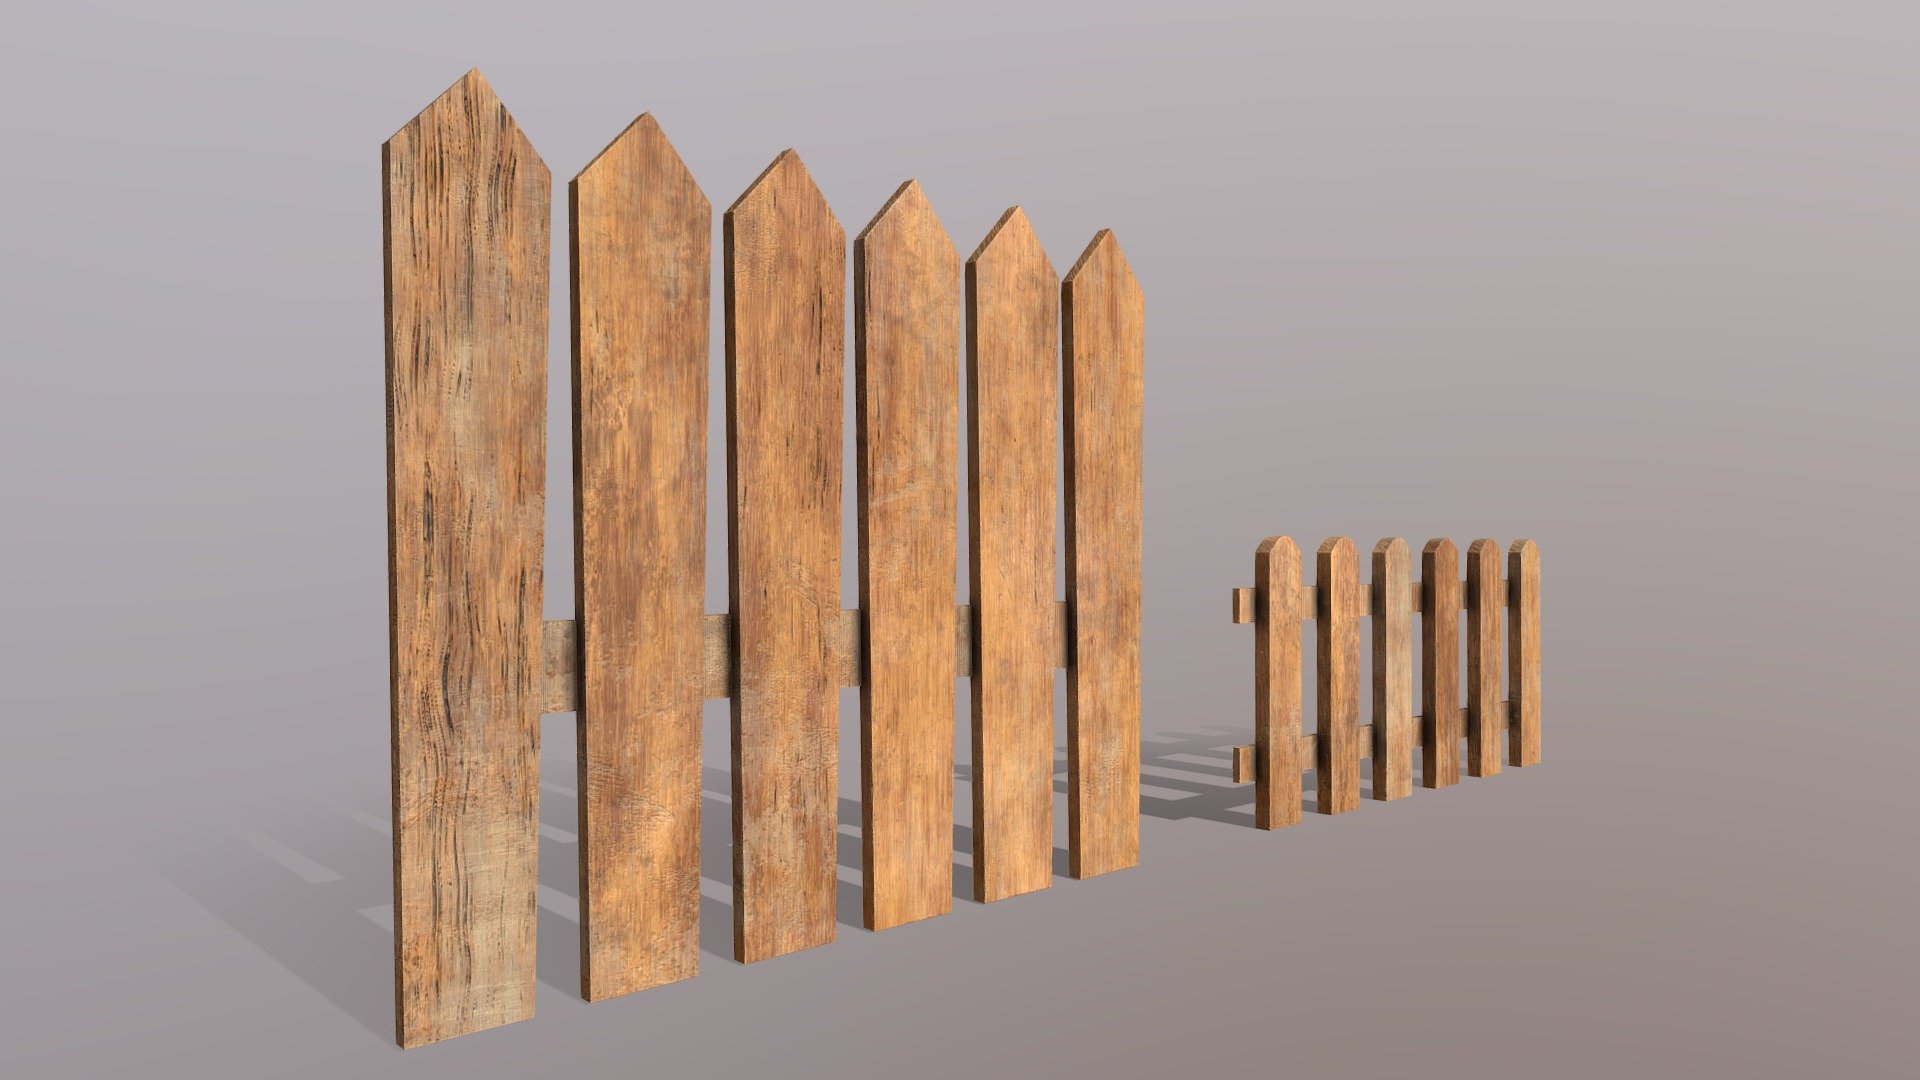 Wooden Fence Pack for games and animations. The model is game ready and compatible with game engines. 

It can be used to create a fence for realistic games.

TWO variations of the fence are included.

The package contains 4K (4096x4096) PBR textures which are highly detailed HD.

Specific PBR maps for the following  game engines are included in separate folders contained in the package:




Unity

Unreal

PBR - Metal Rough

The package contains 2 Individual modular pieces that can be arranged in any desired formation.

Pieces included:




Large fence

Small fence

Total polycount - 228 polygons - 156 Vertices (Low-Poly)

The 3d model is properly UV mapped with non-overlapping and optimised UV's for a better texel density.  

Create and build your own PC &amp; mobile environments using our PBR Modular Fence Pack.

This fence pack is just one out of a series of urban packs offered by us. Have a look at our store to find more types 3d model